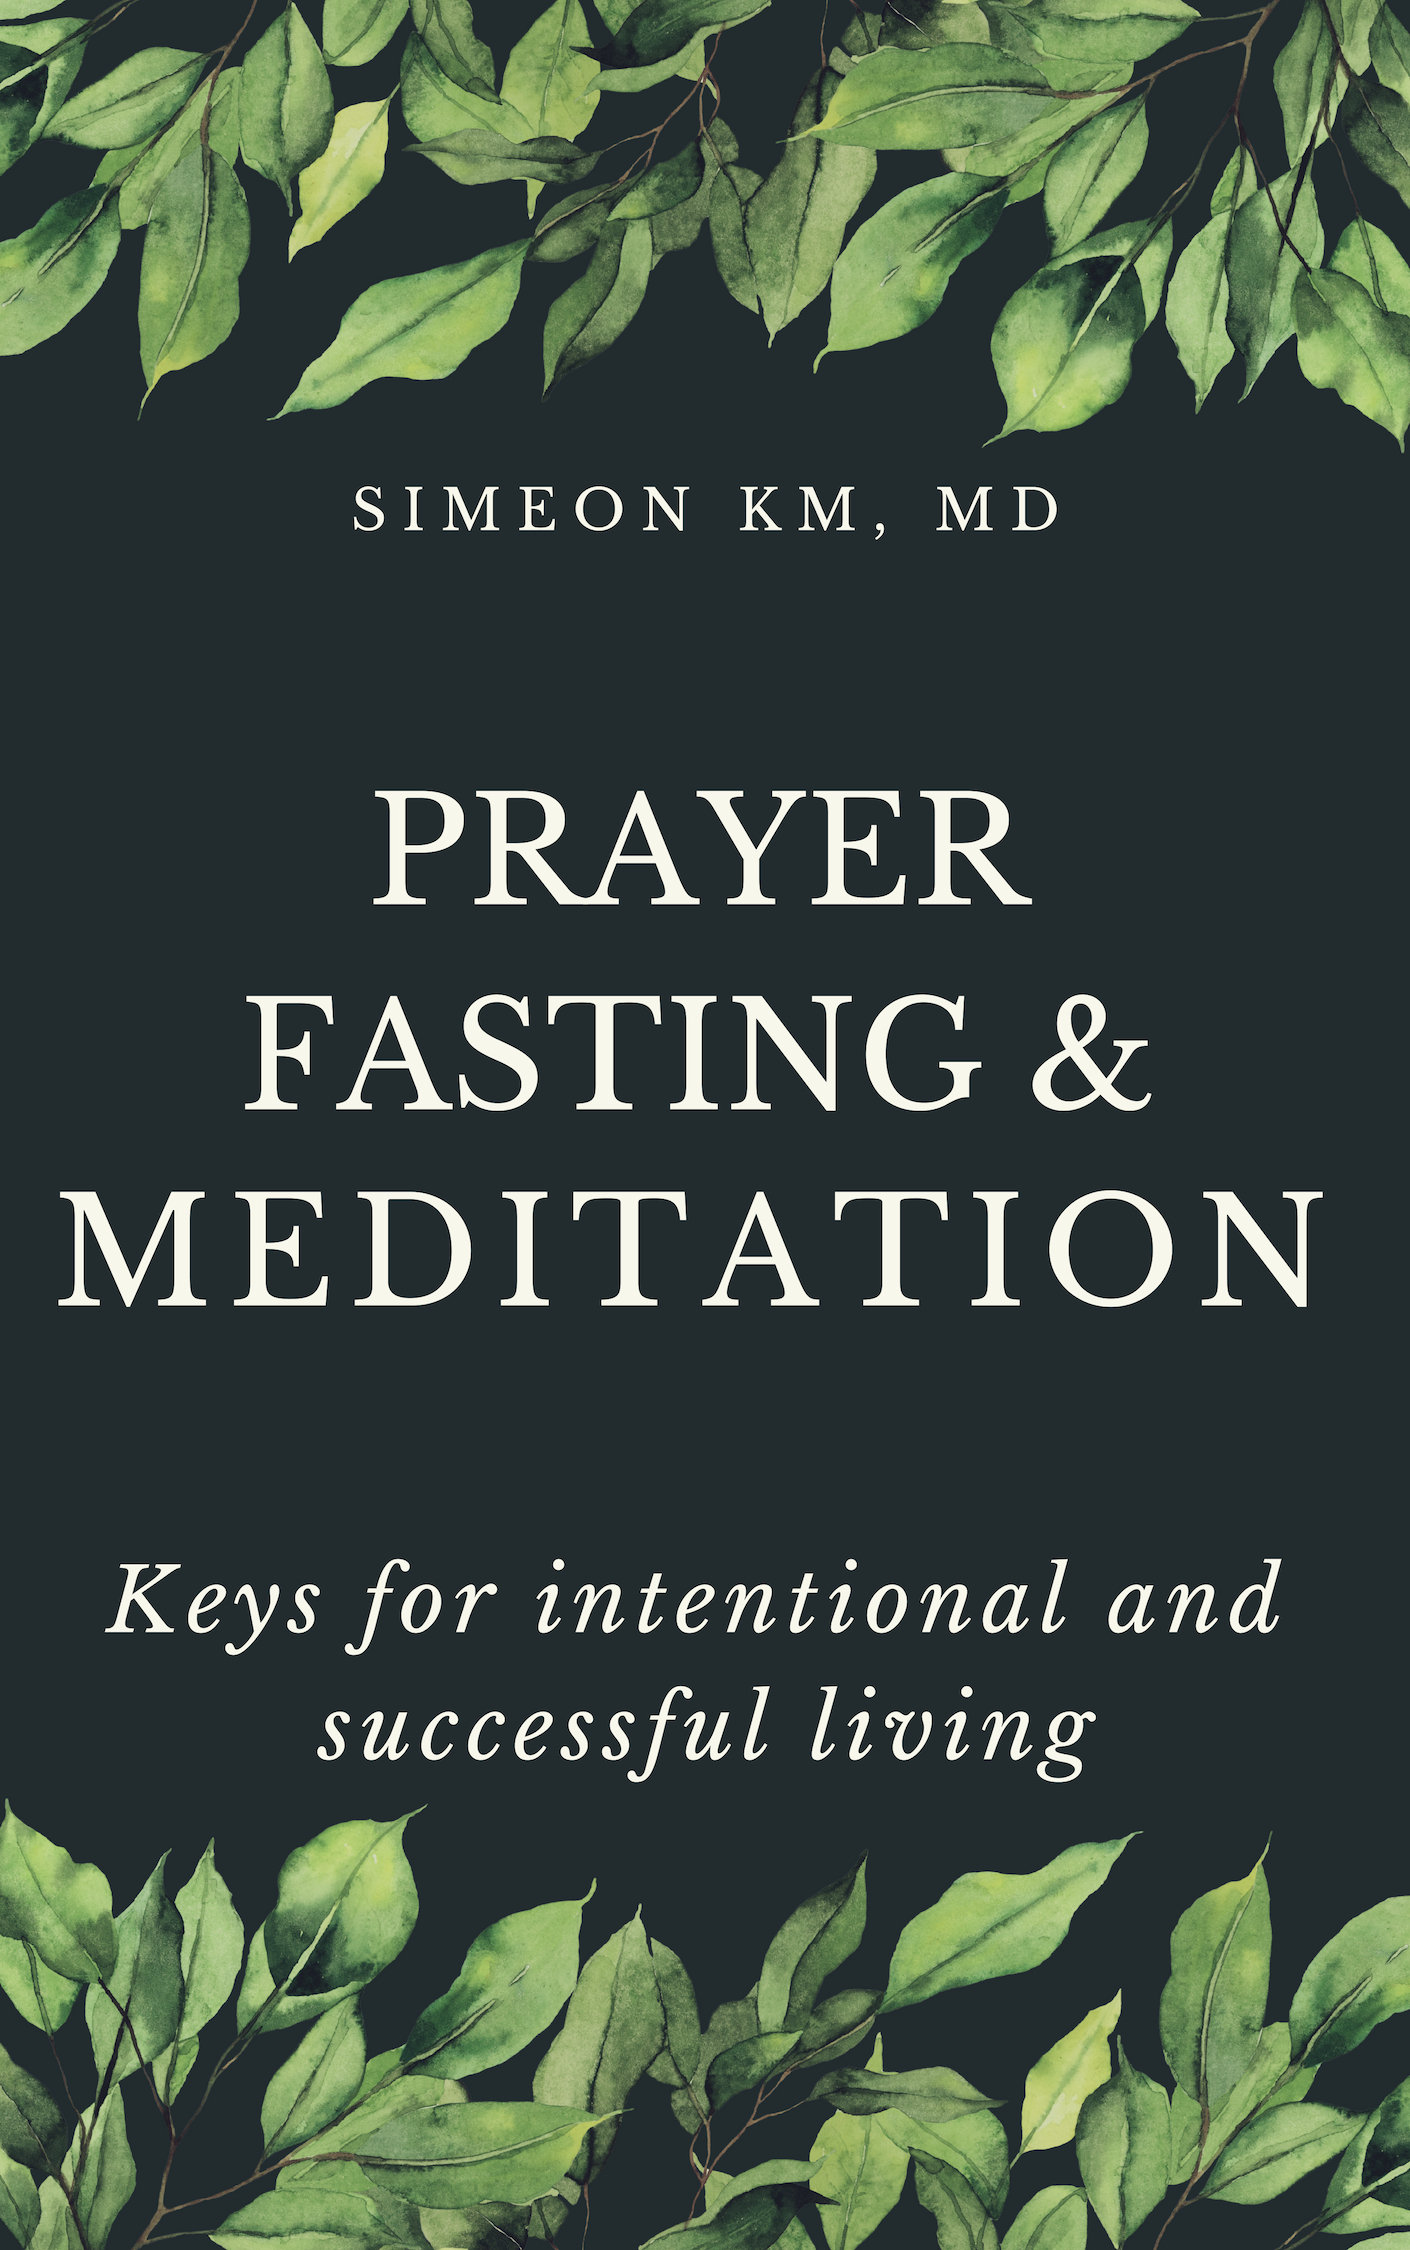 FREE: Prayer, Fasting, and Meditation: Keys for intentional and successful living by Simeon KM. MD